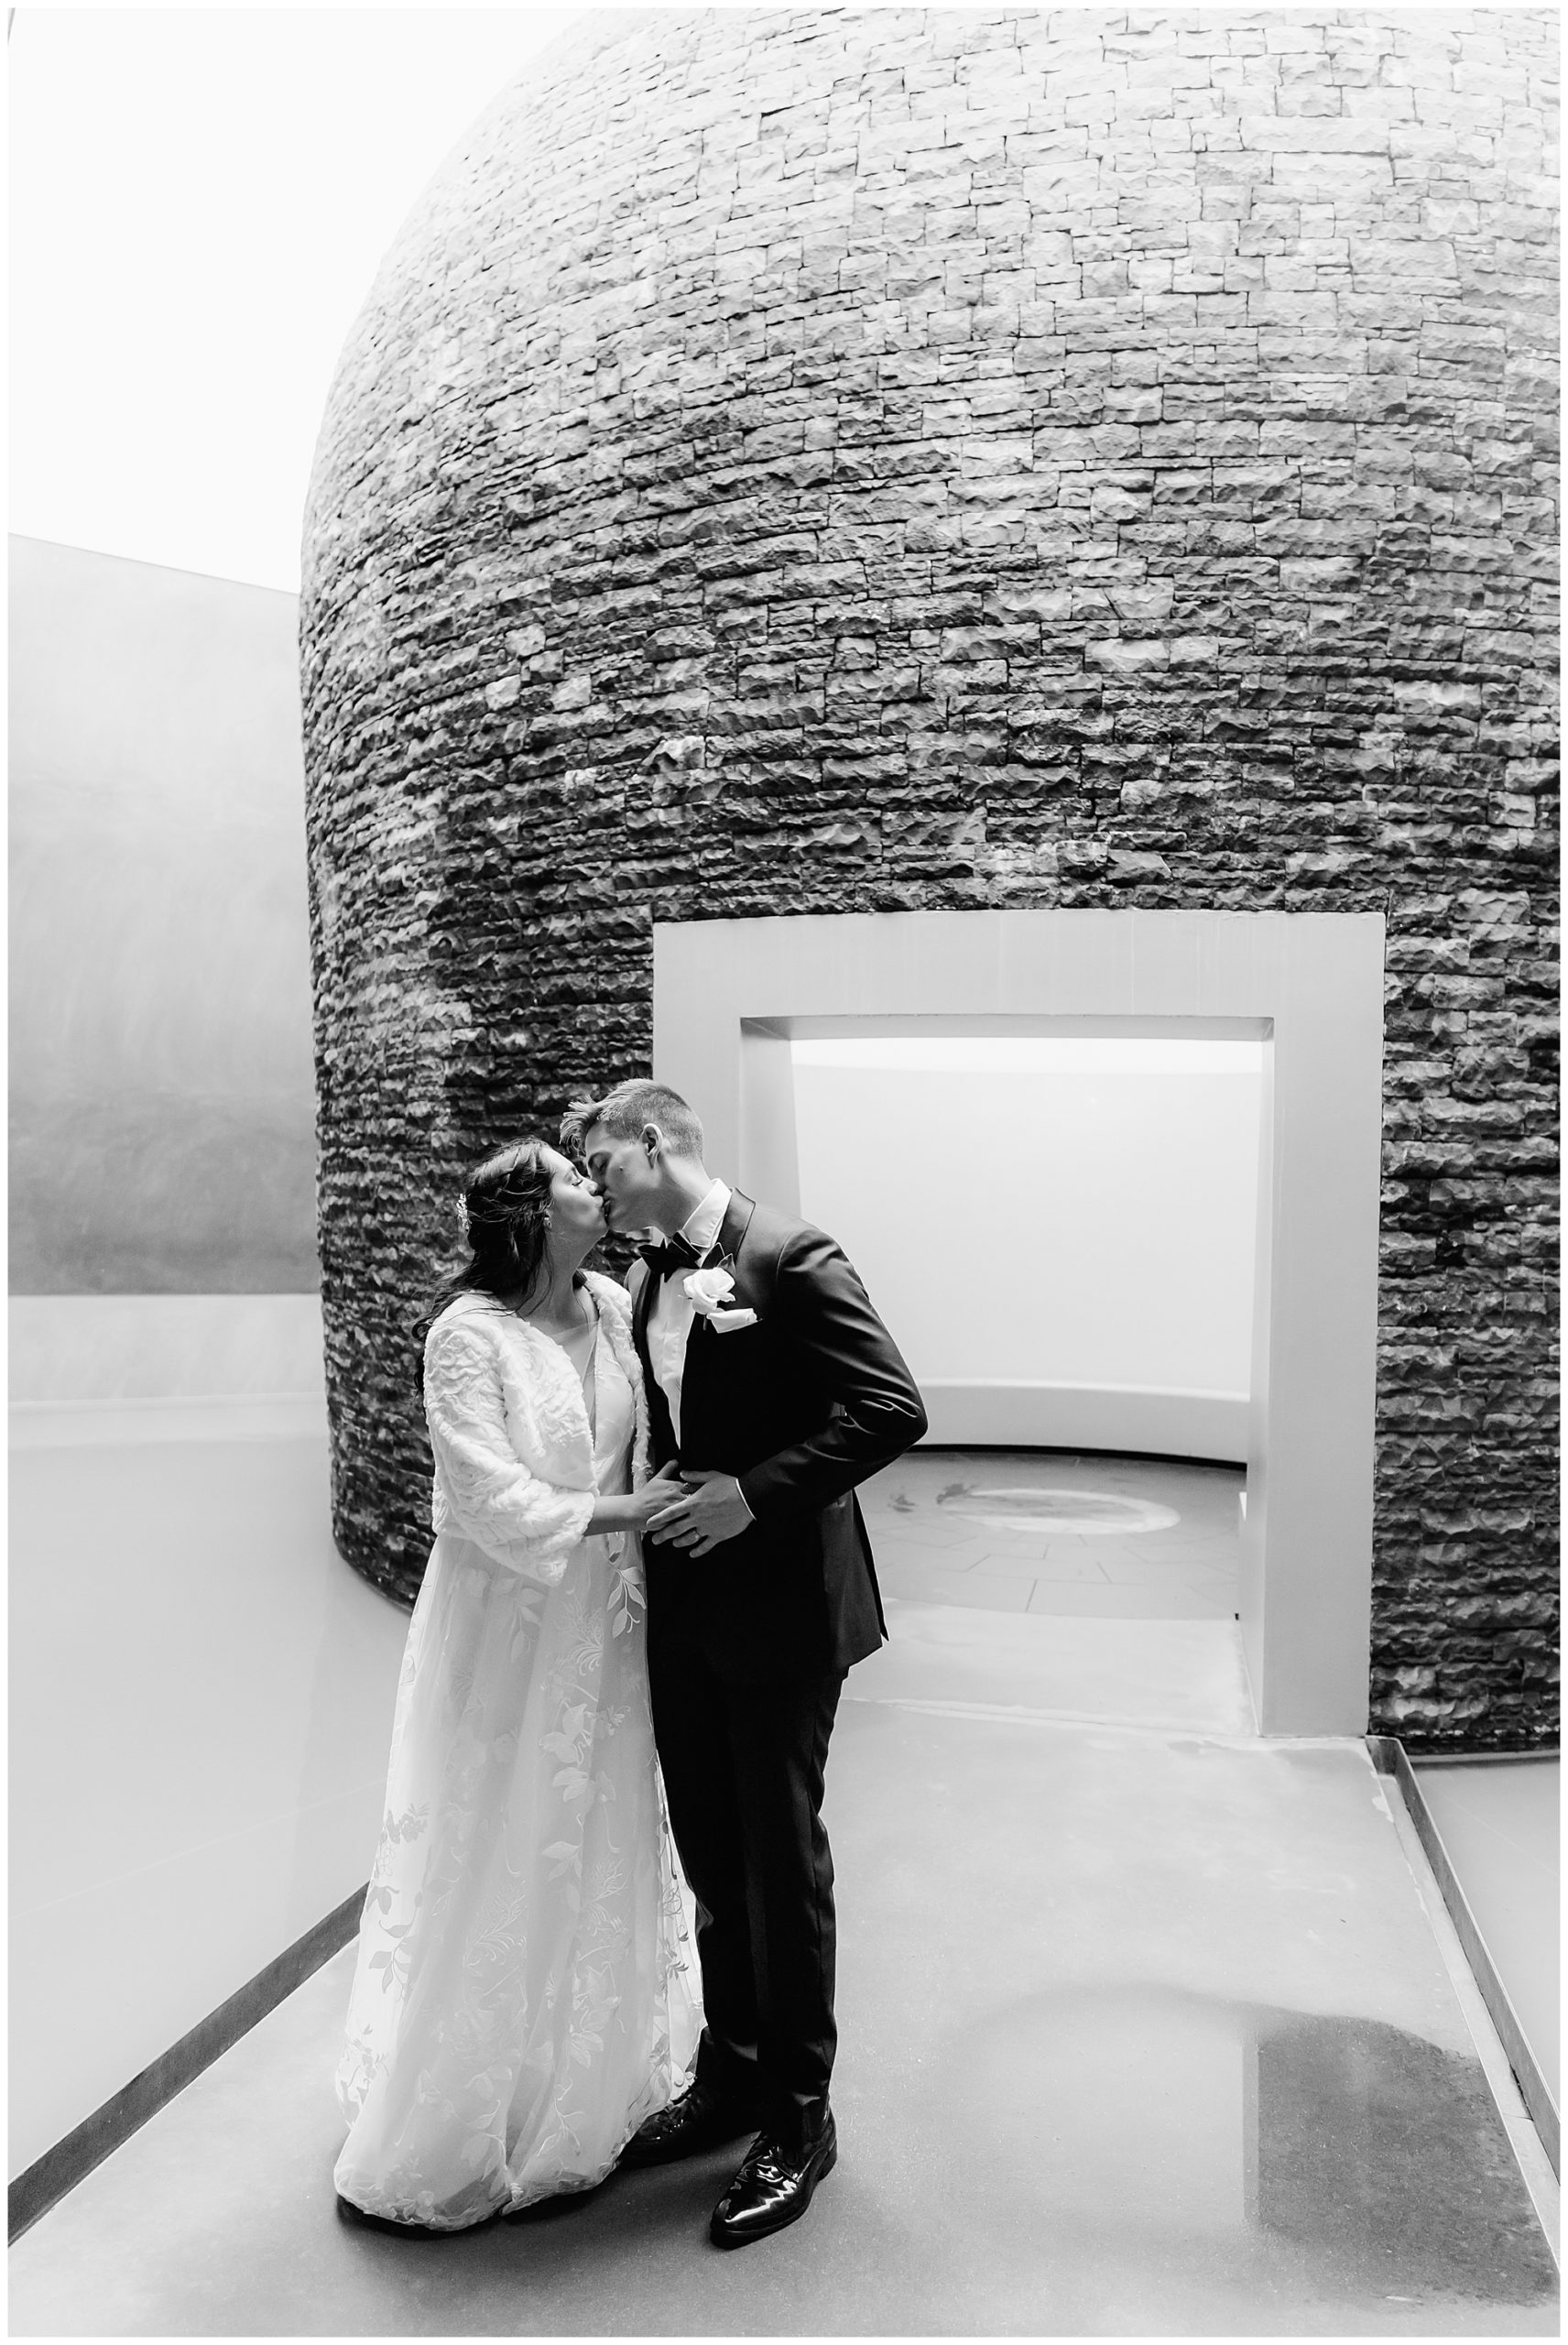 "Within Without" James Turrell Skyspace wedding photos